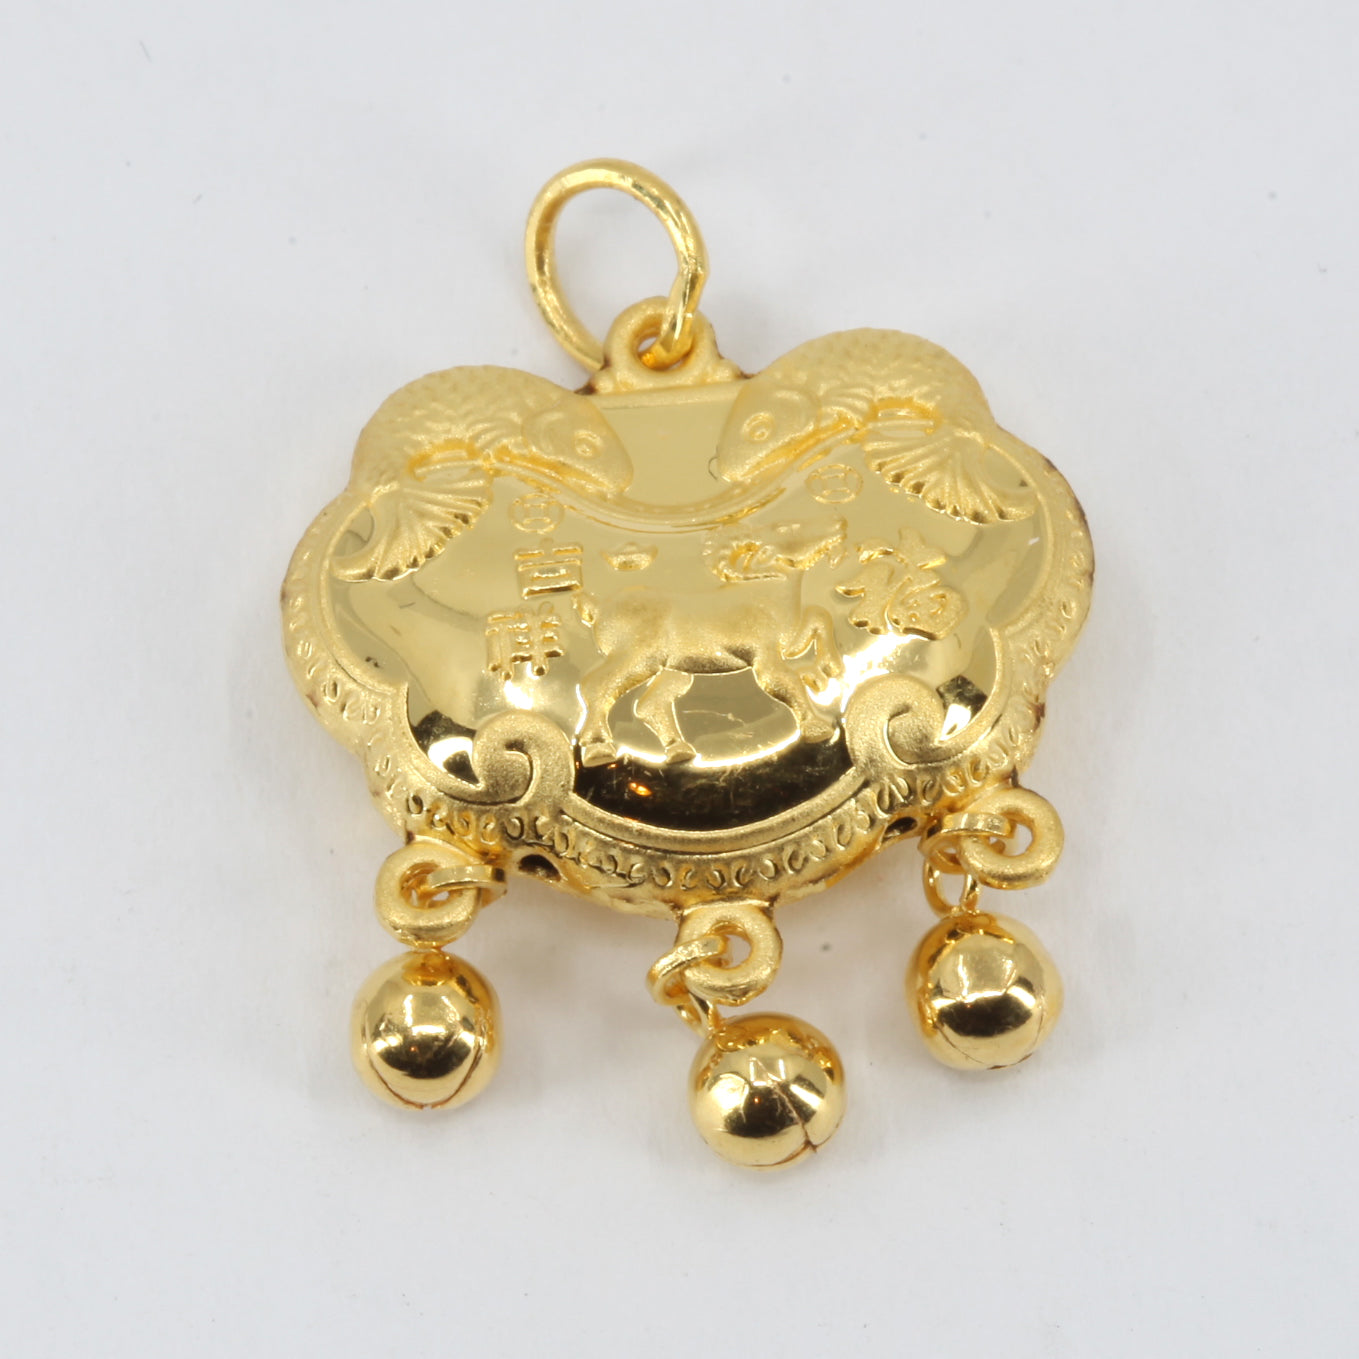 24K Solid Yellow Gold Baby Puffy Sheep Longevity Lock with Bells Hollow Pendant 3.8 Grams